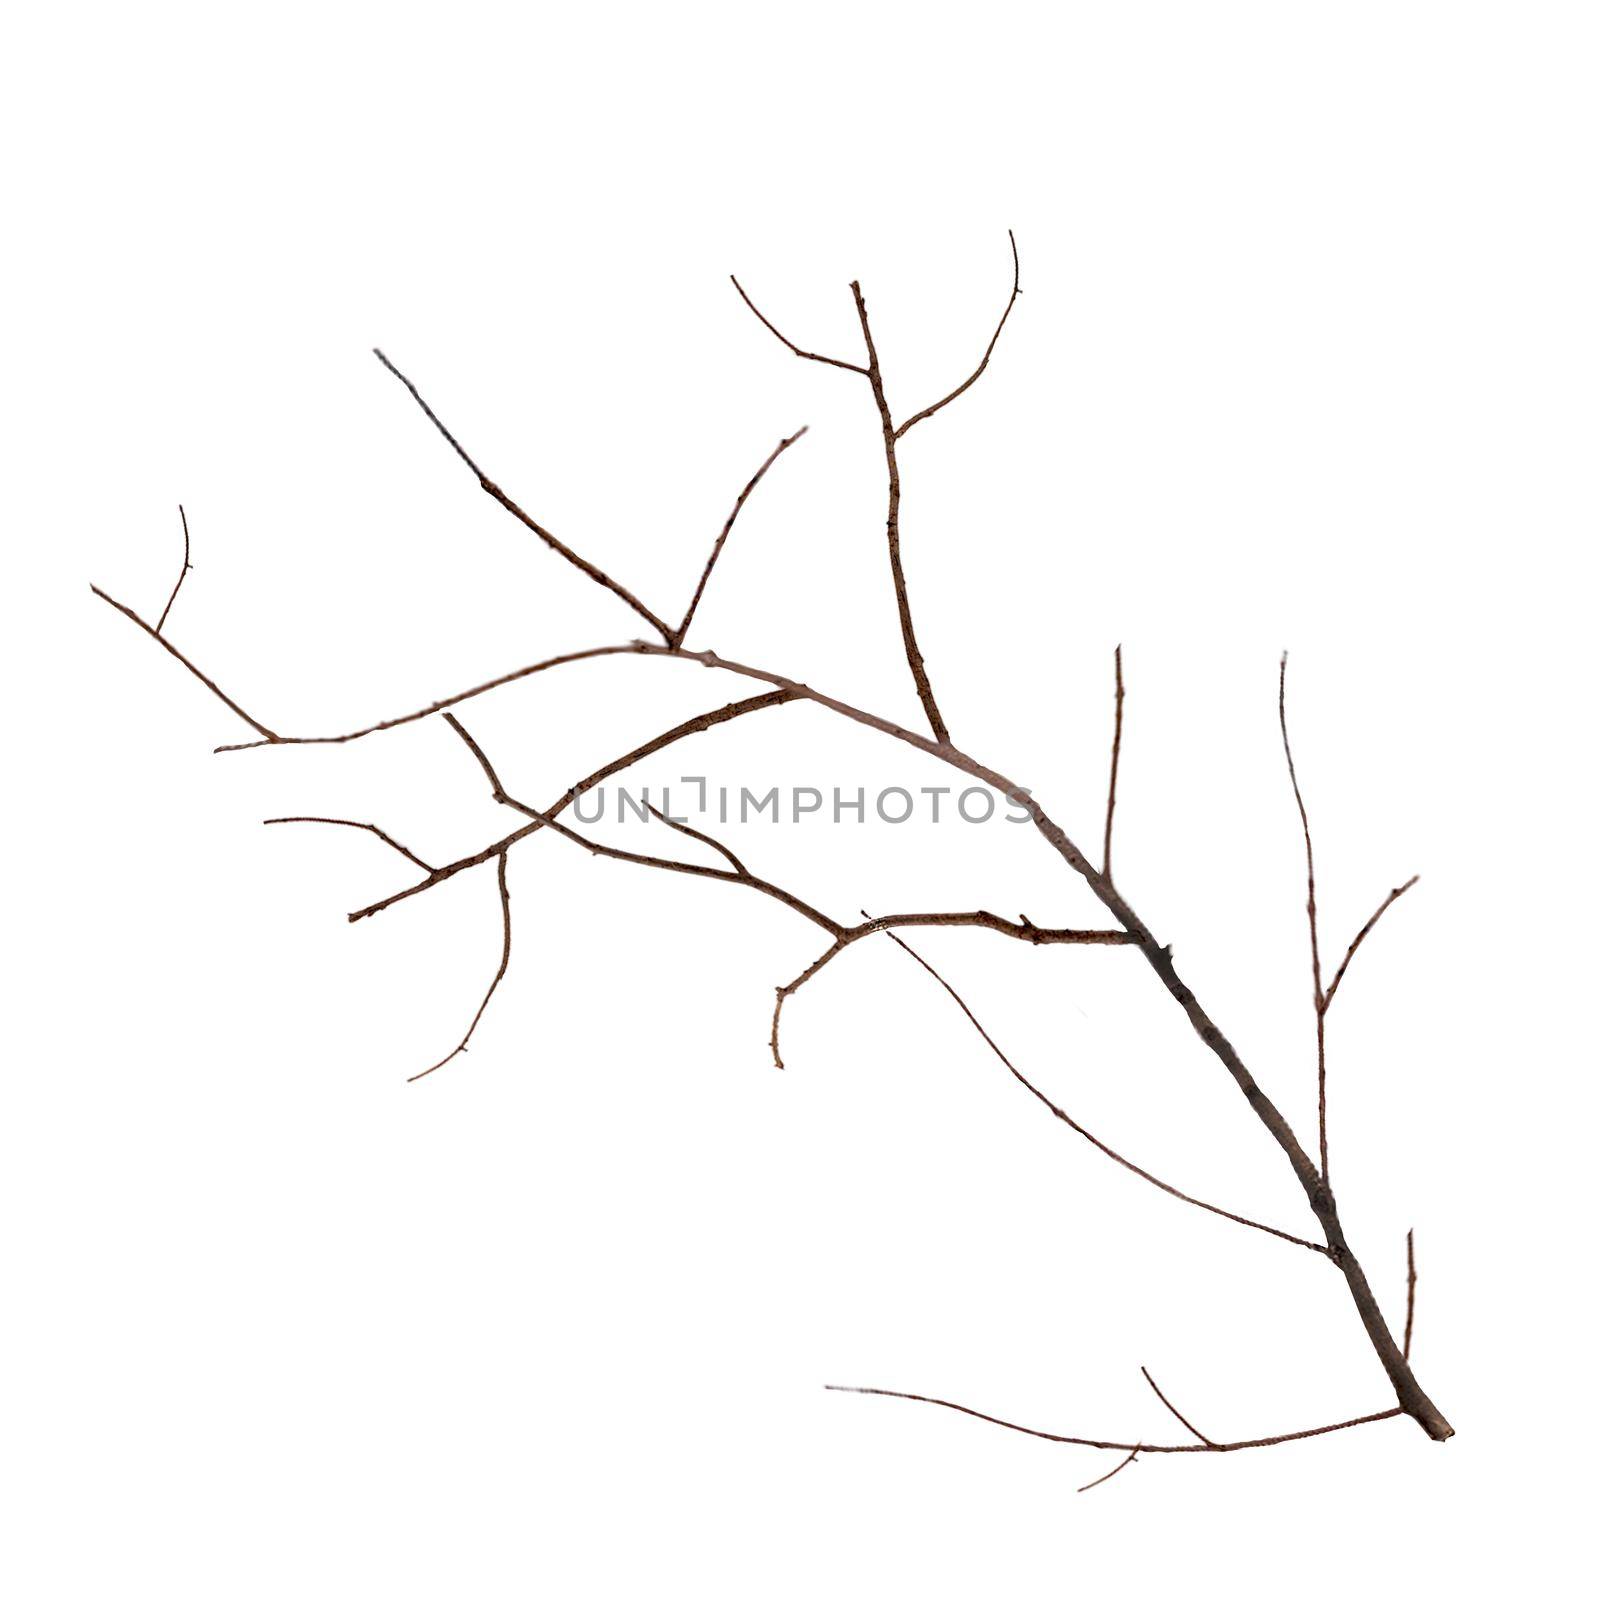 The dry part of the branch is isolated on a white background by Mastak80